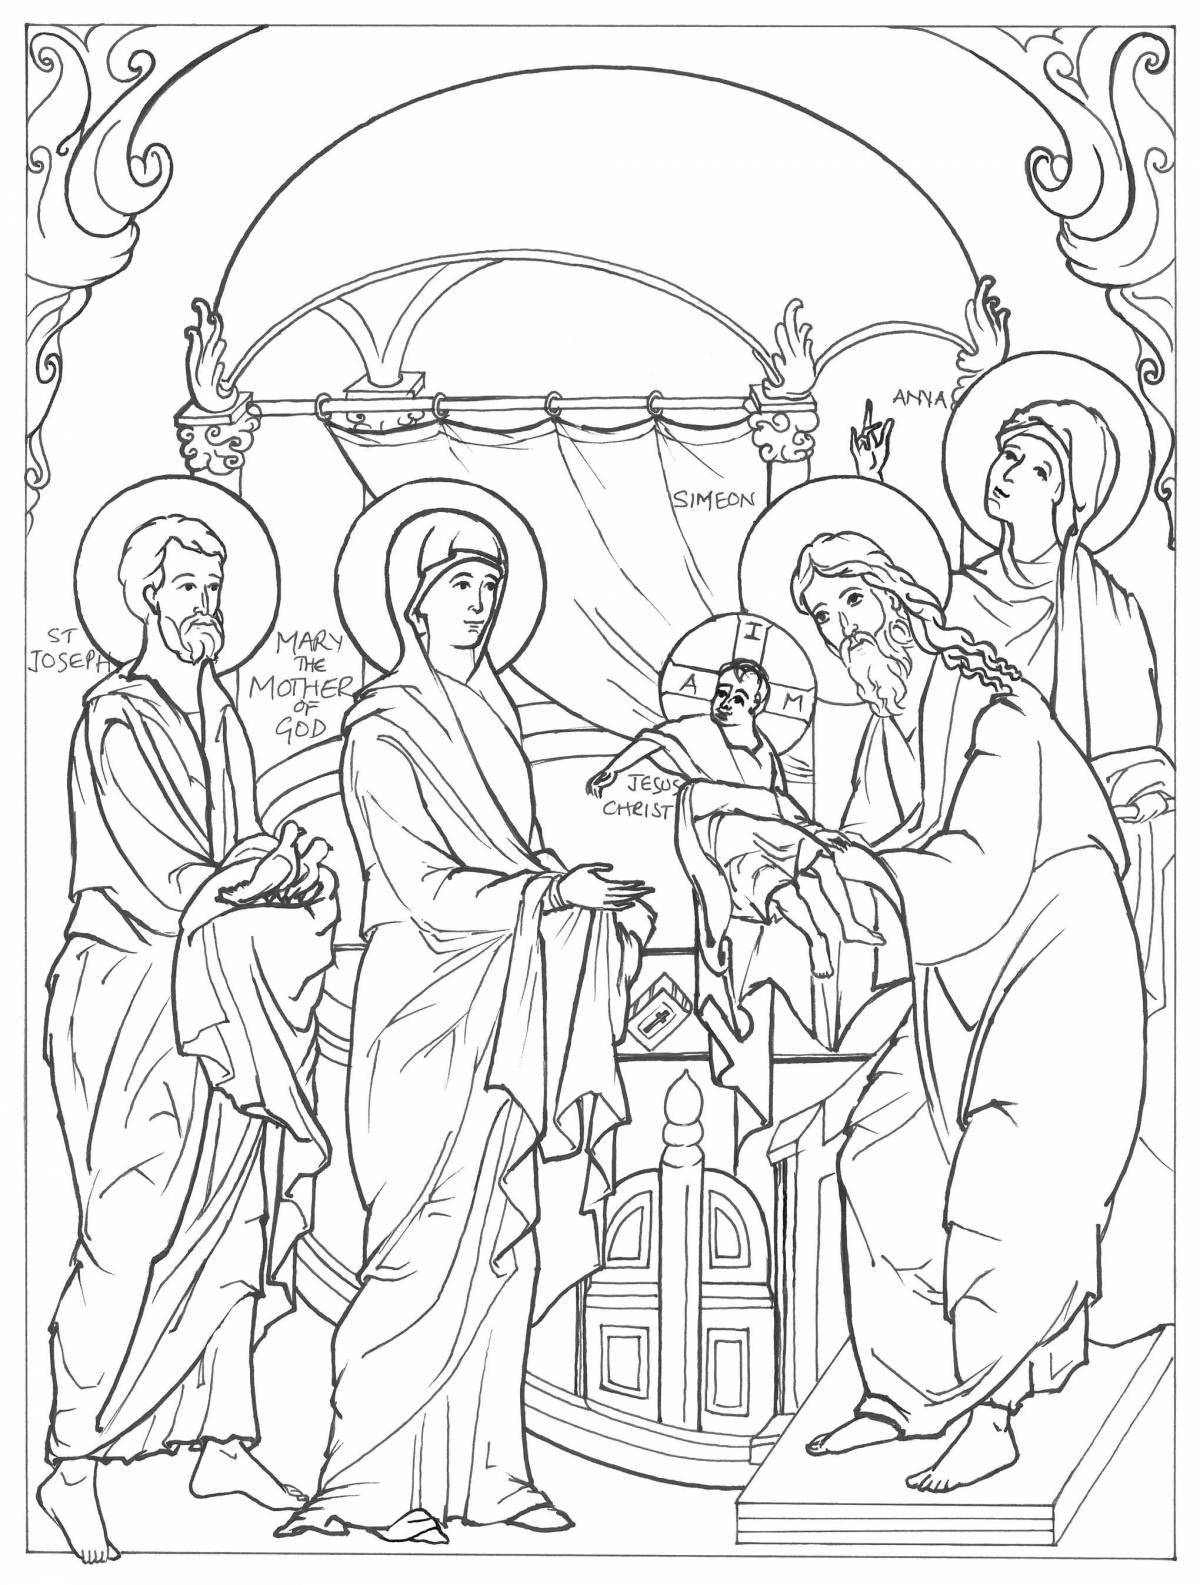 Exciting candlemas coloring book